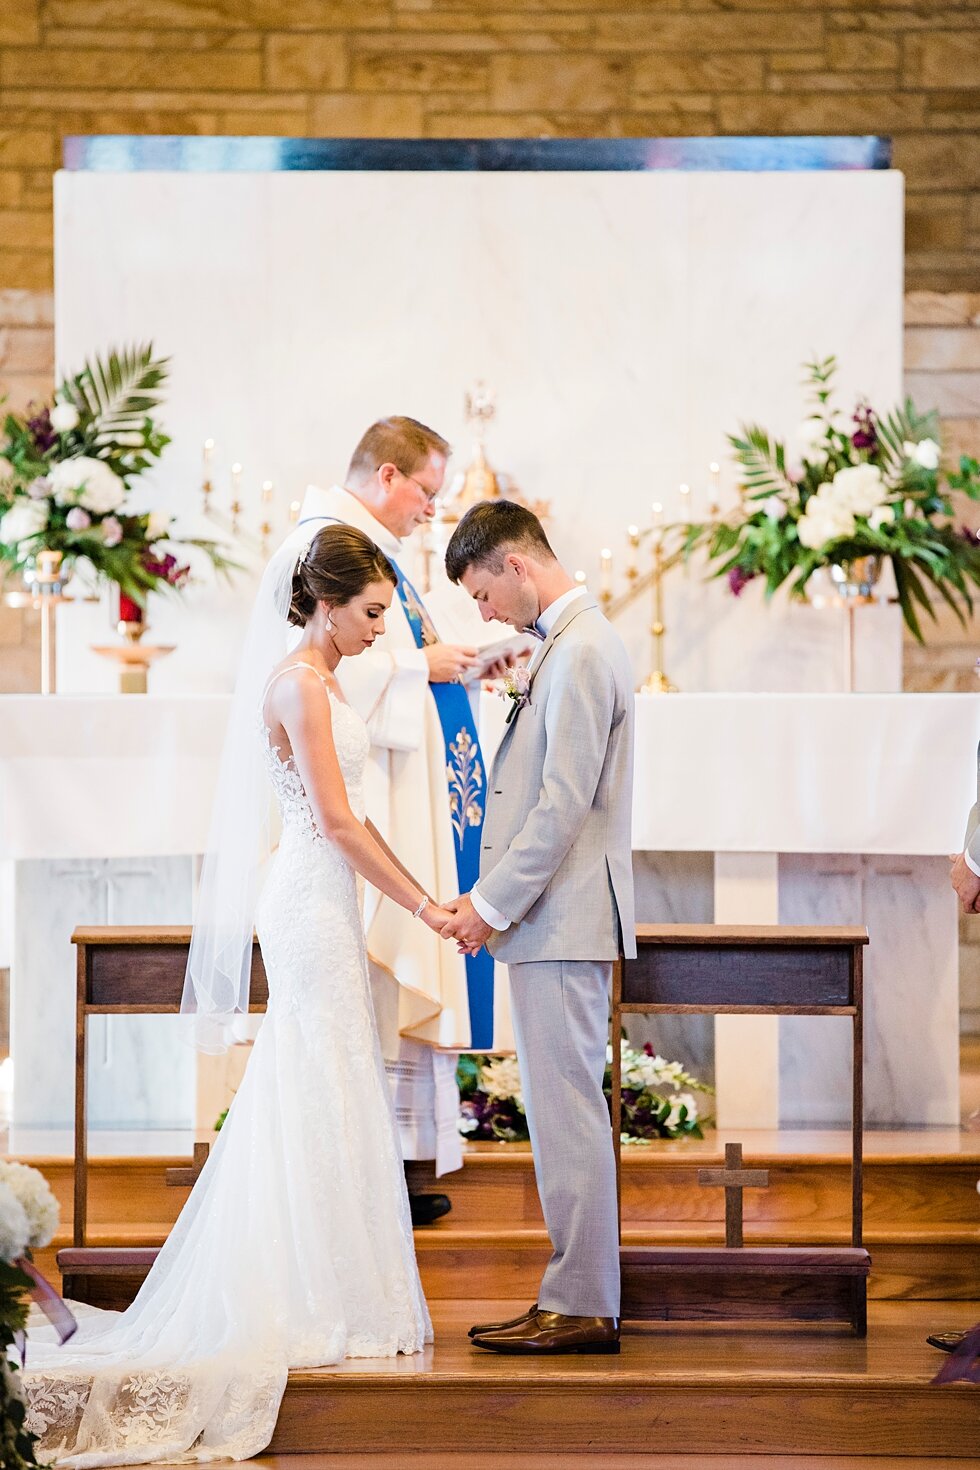  Bride and groom holding hands during their wedding ceremony in Louisville, Kentucky. wedding ceremony details stunning photography married midwest louisville kentucky #weddingphoto #love #justmarried #midwestphotographer #kywedding #louisville #kent